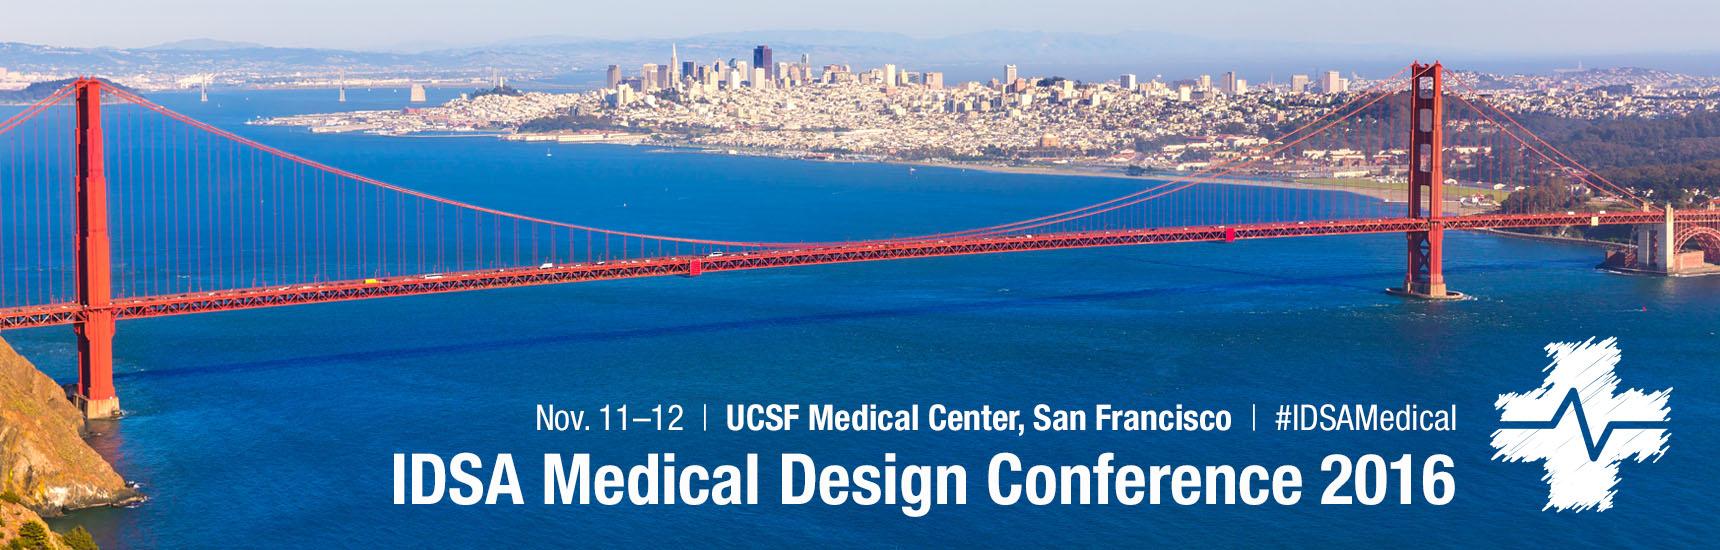 IDSA Medical Conference 2016 Location Industrial Designers Society